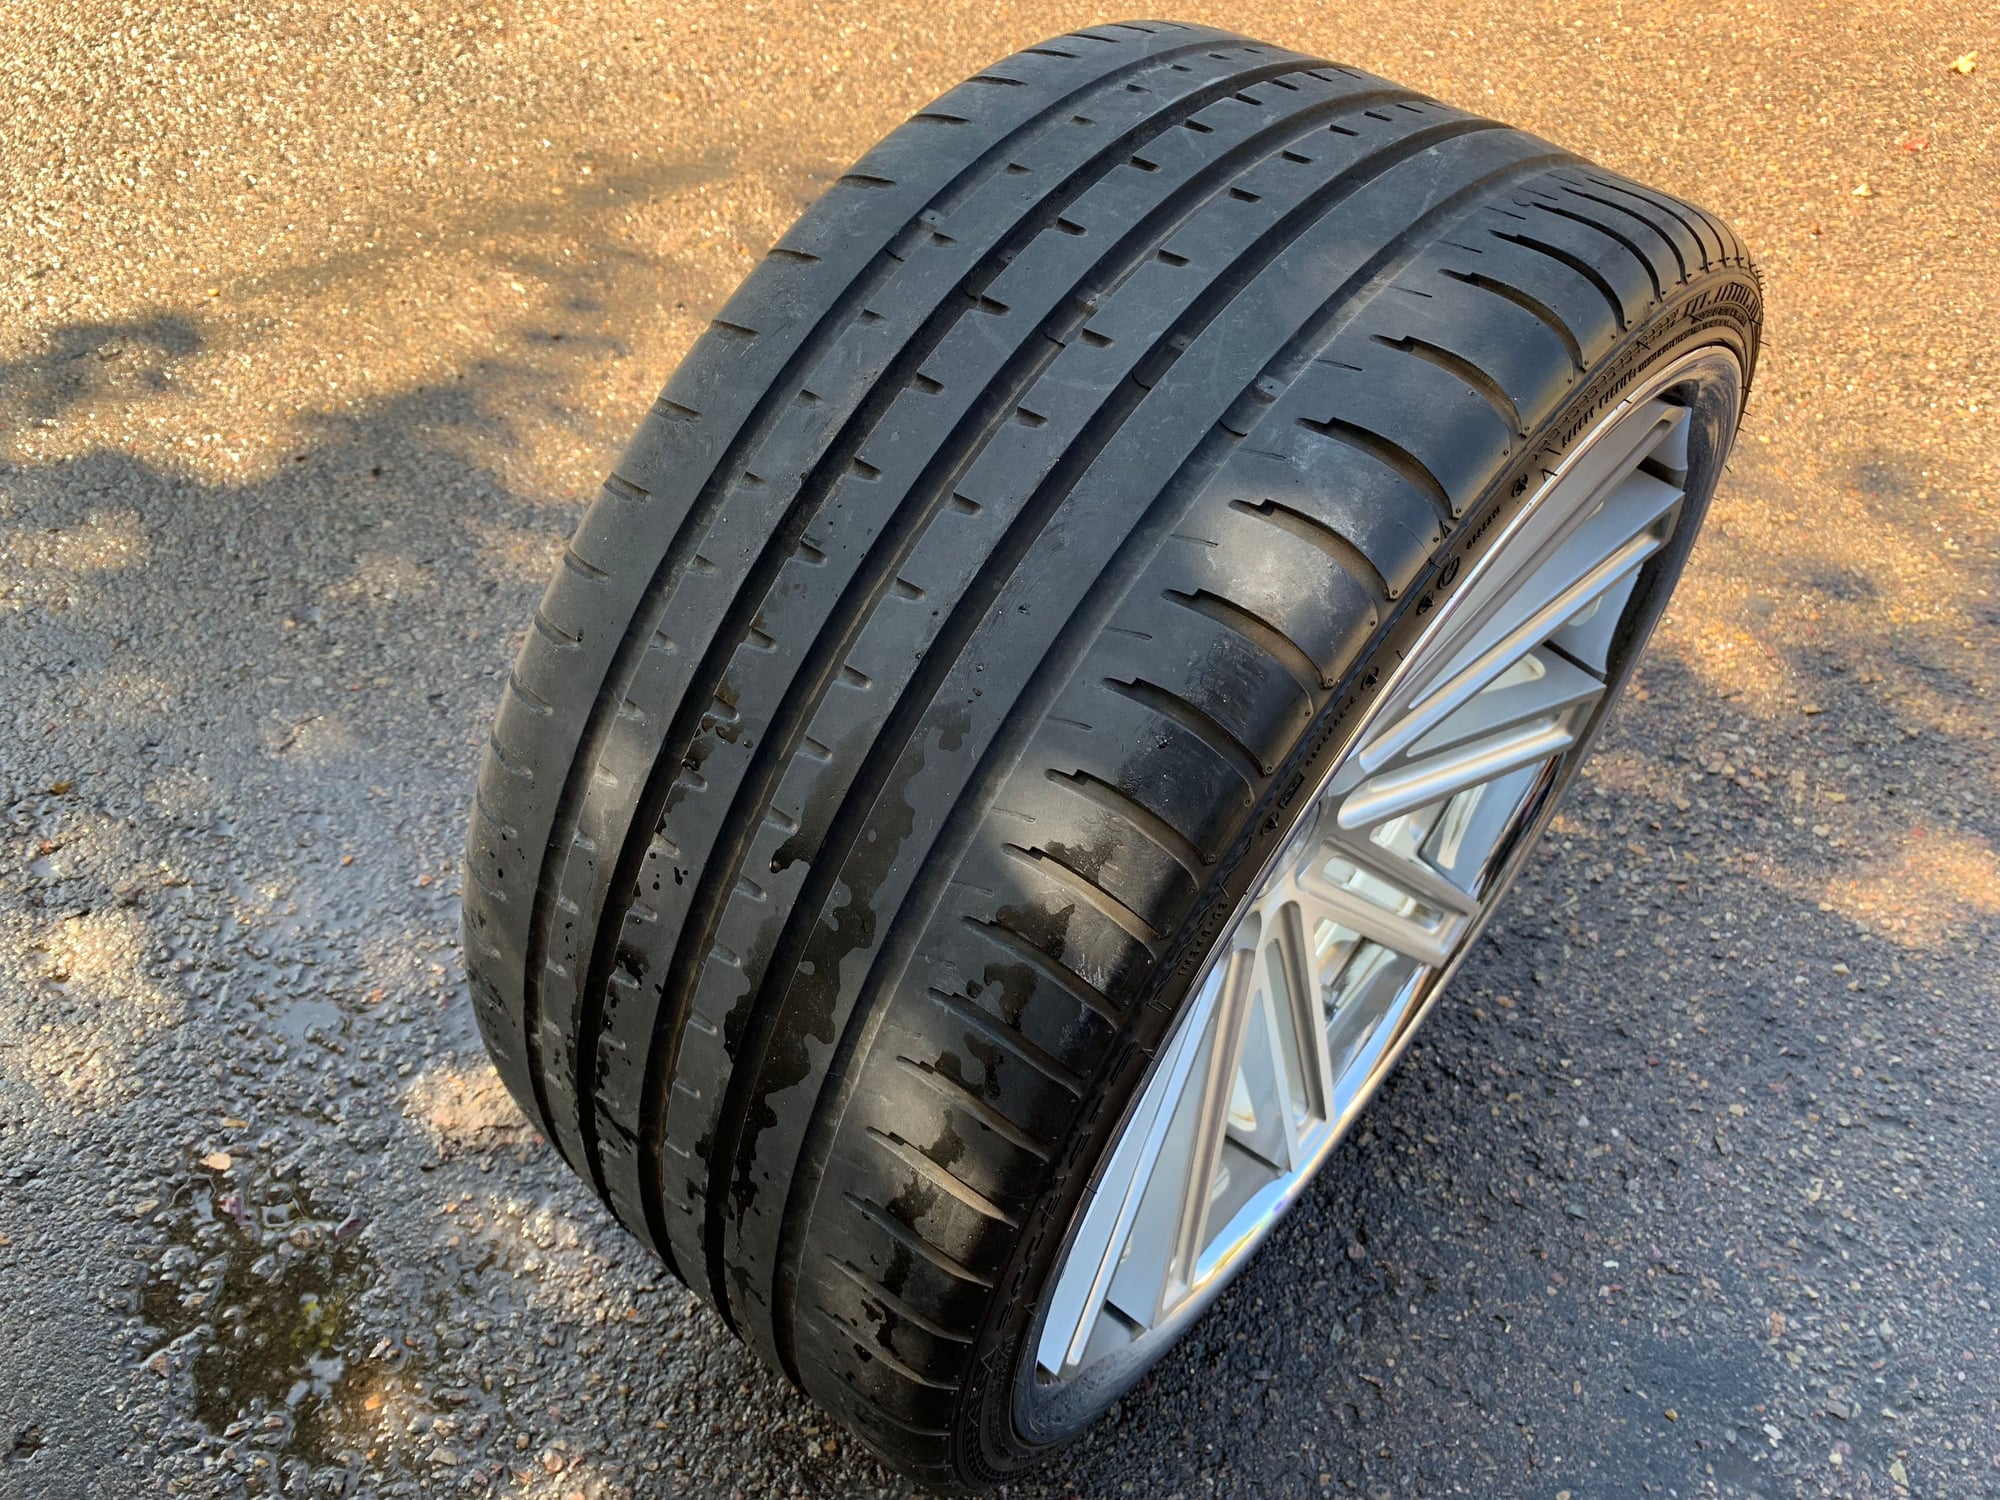 Wheels and Tires/Axles - 21" Coventry Warwick Wheels with Tires - Used - 2009 to 2019 Jaguar XF - San Diego, CA 92124, United States